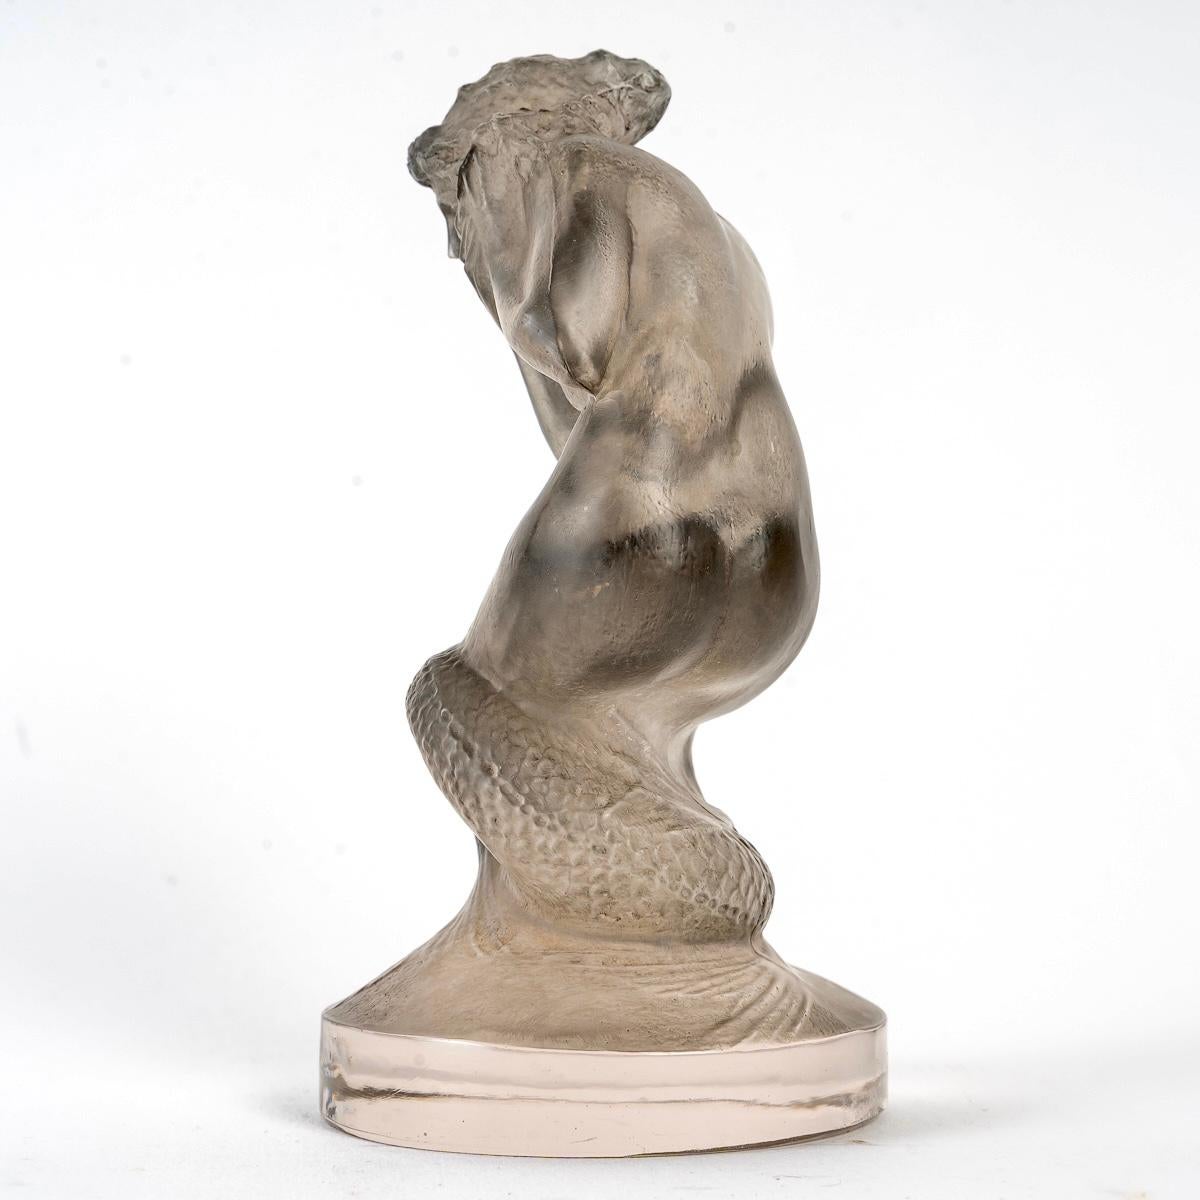 Molded 1920 René Lalique, Car Mascot Statuette Naiade Frosted Glass with Grey Patina